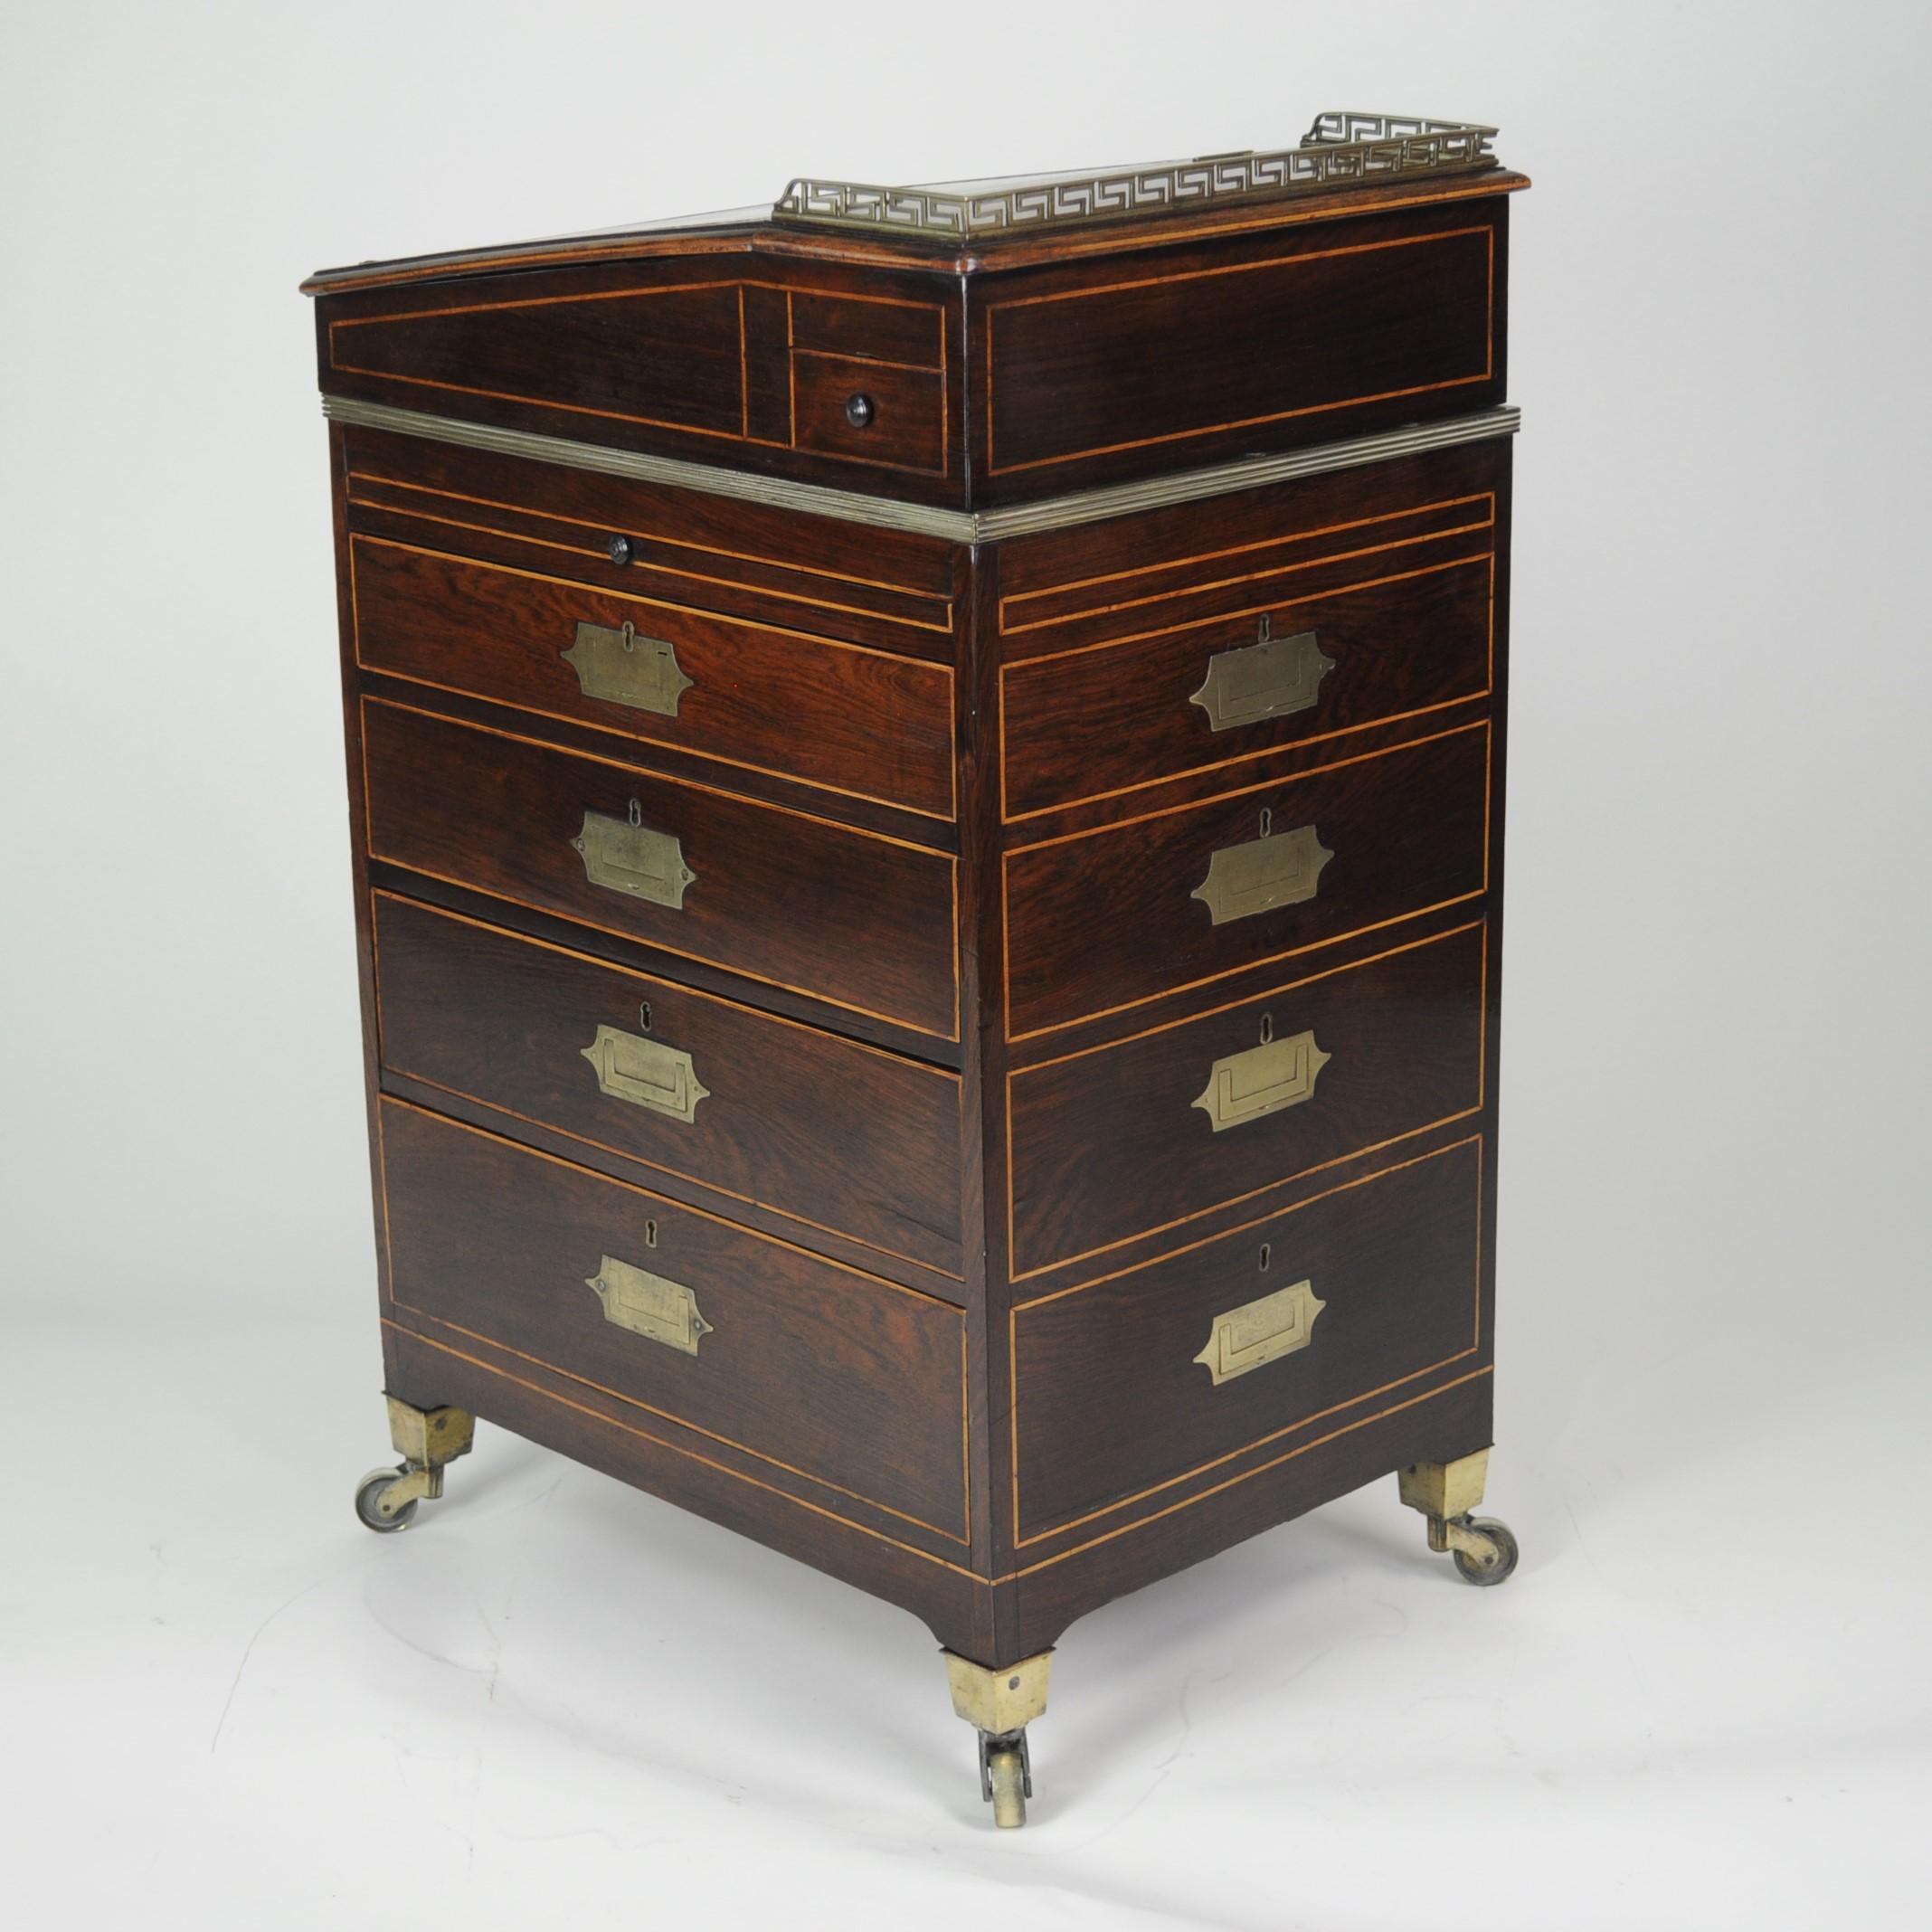 A small and rare rosewood campaign Davenport desk of compact proportions. The galleried top with leather-lined writing surface opening to real a fitted interior, above a bank of four drawers which pull-out from the right side, but are replicated on